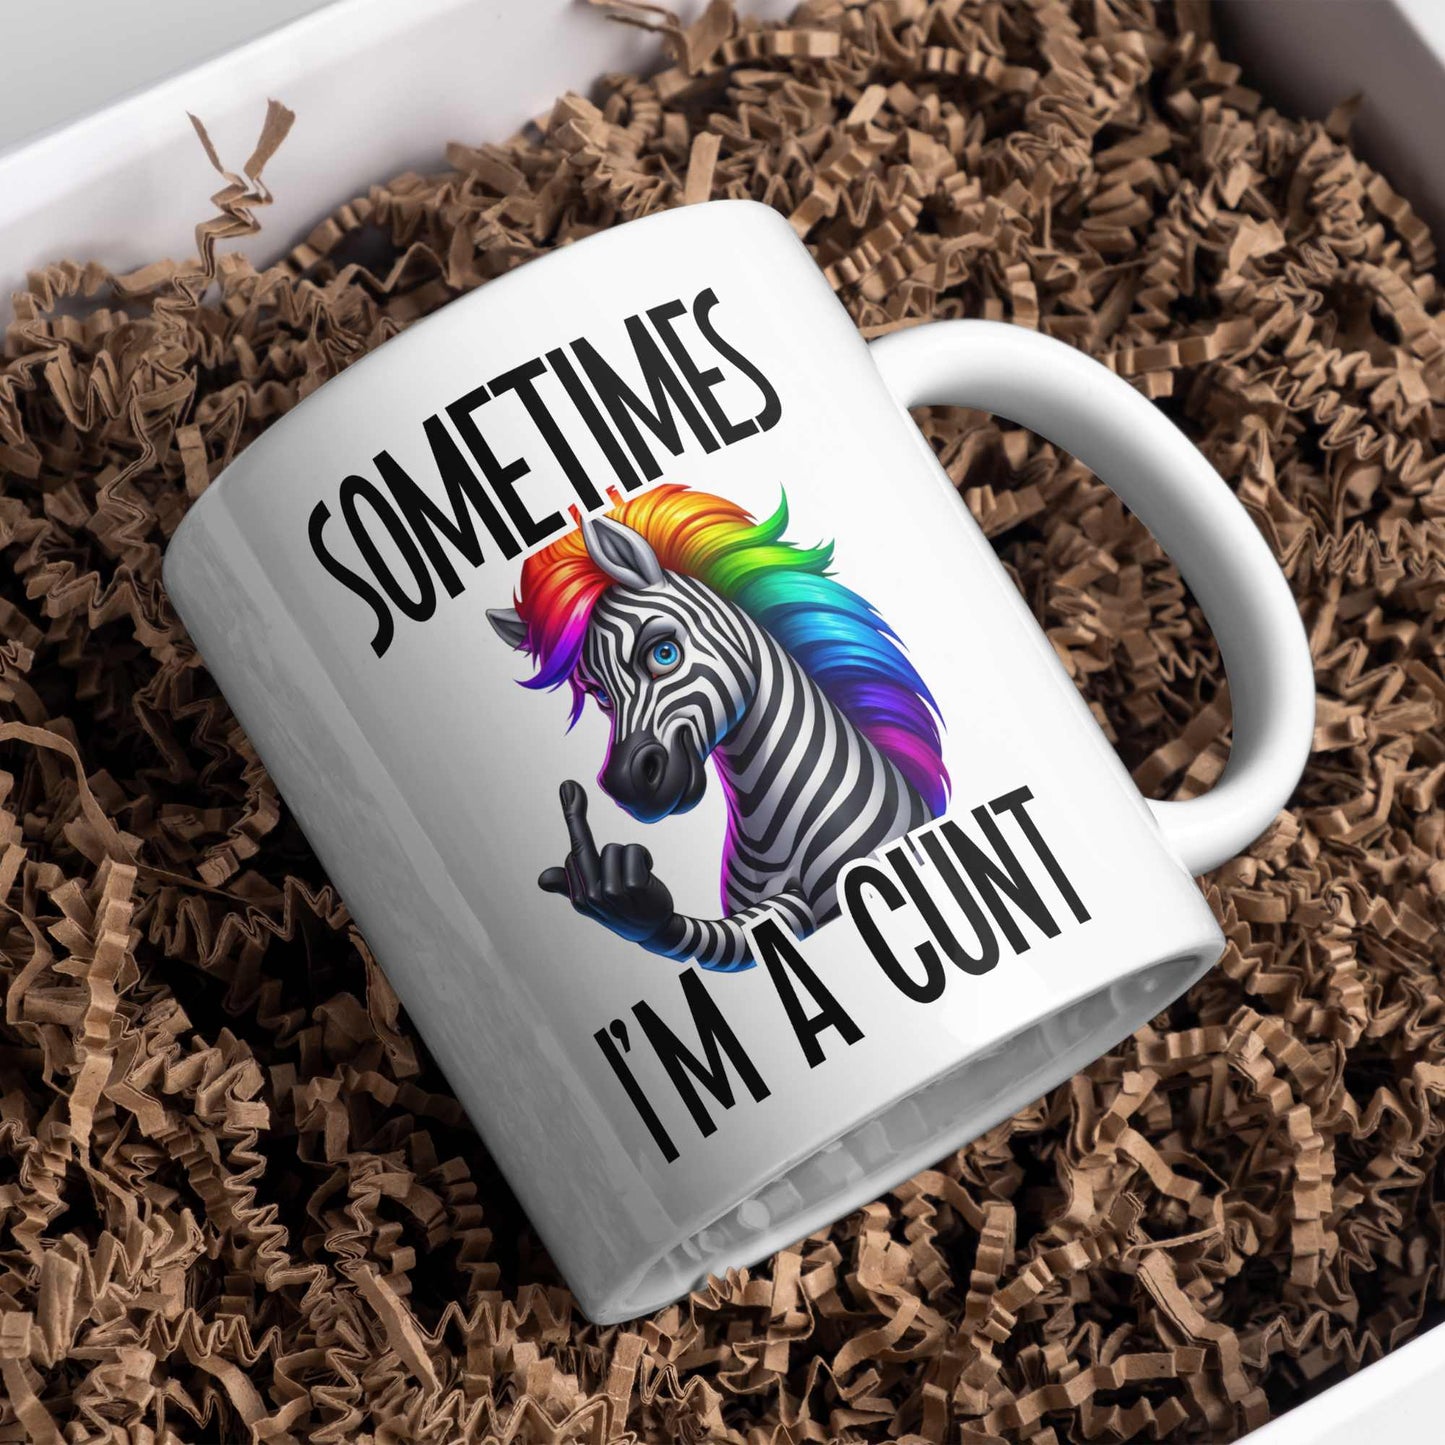 Sometimes I'm a Cunt Mug Funny Mugs for Gifts For Bestie Birthday Coworker Gifts Secret Santa Gifts